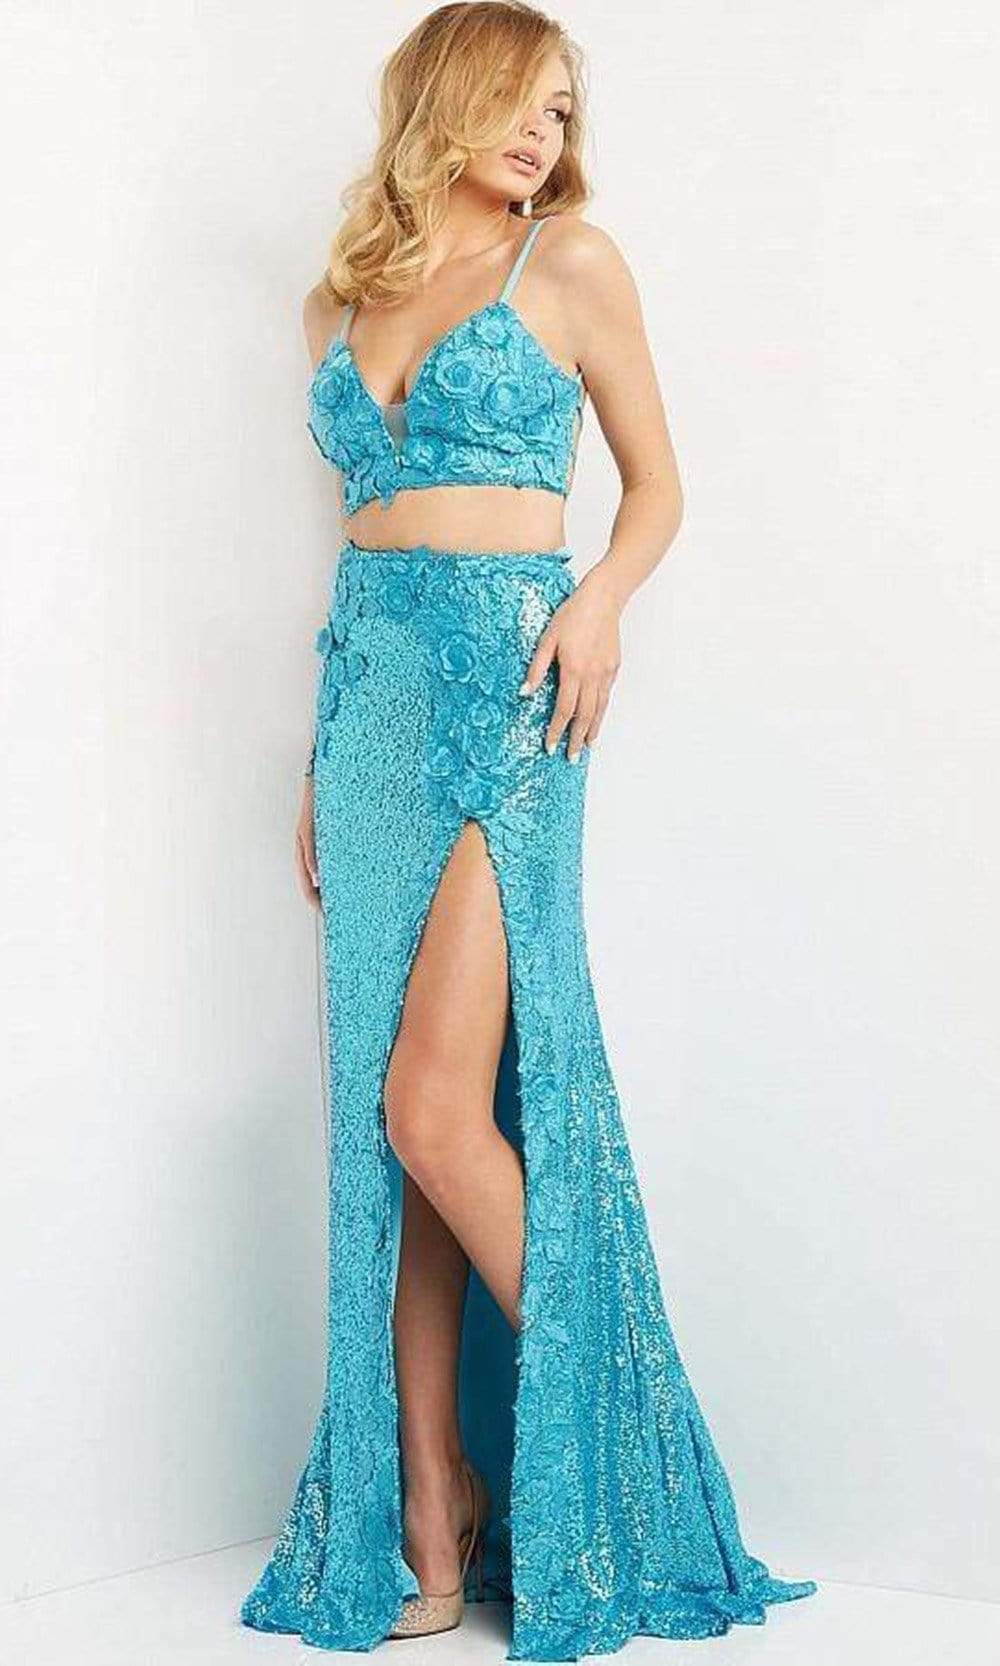 Jovani - 08471 Floral Applique Two-Piece High Slit Sequin Prom Dress Special Occasion Dress 00 / Turquoise